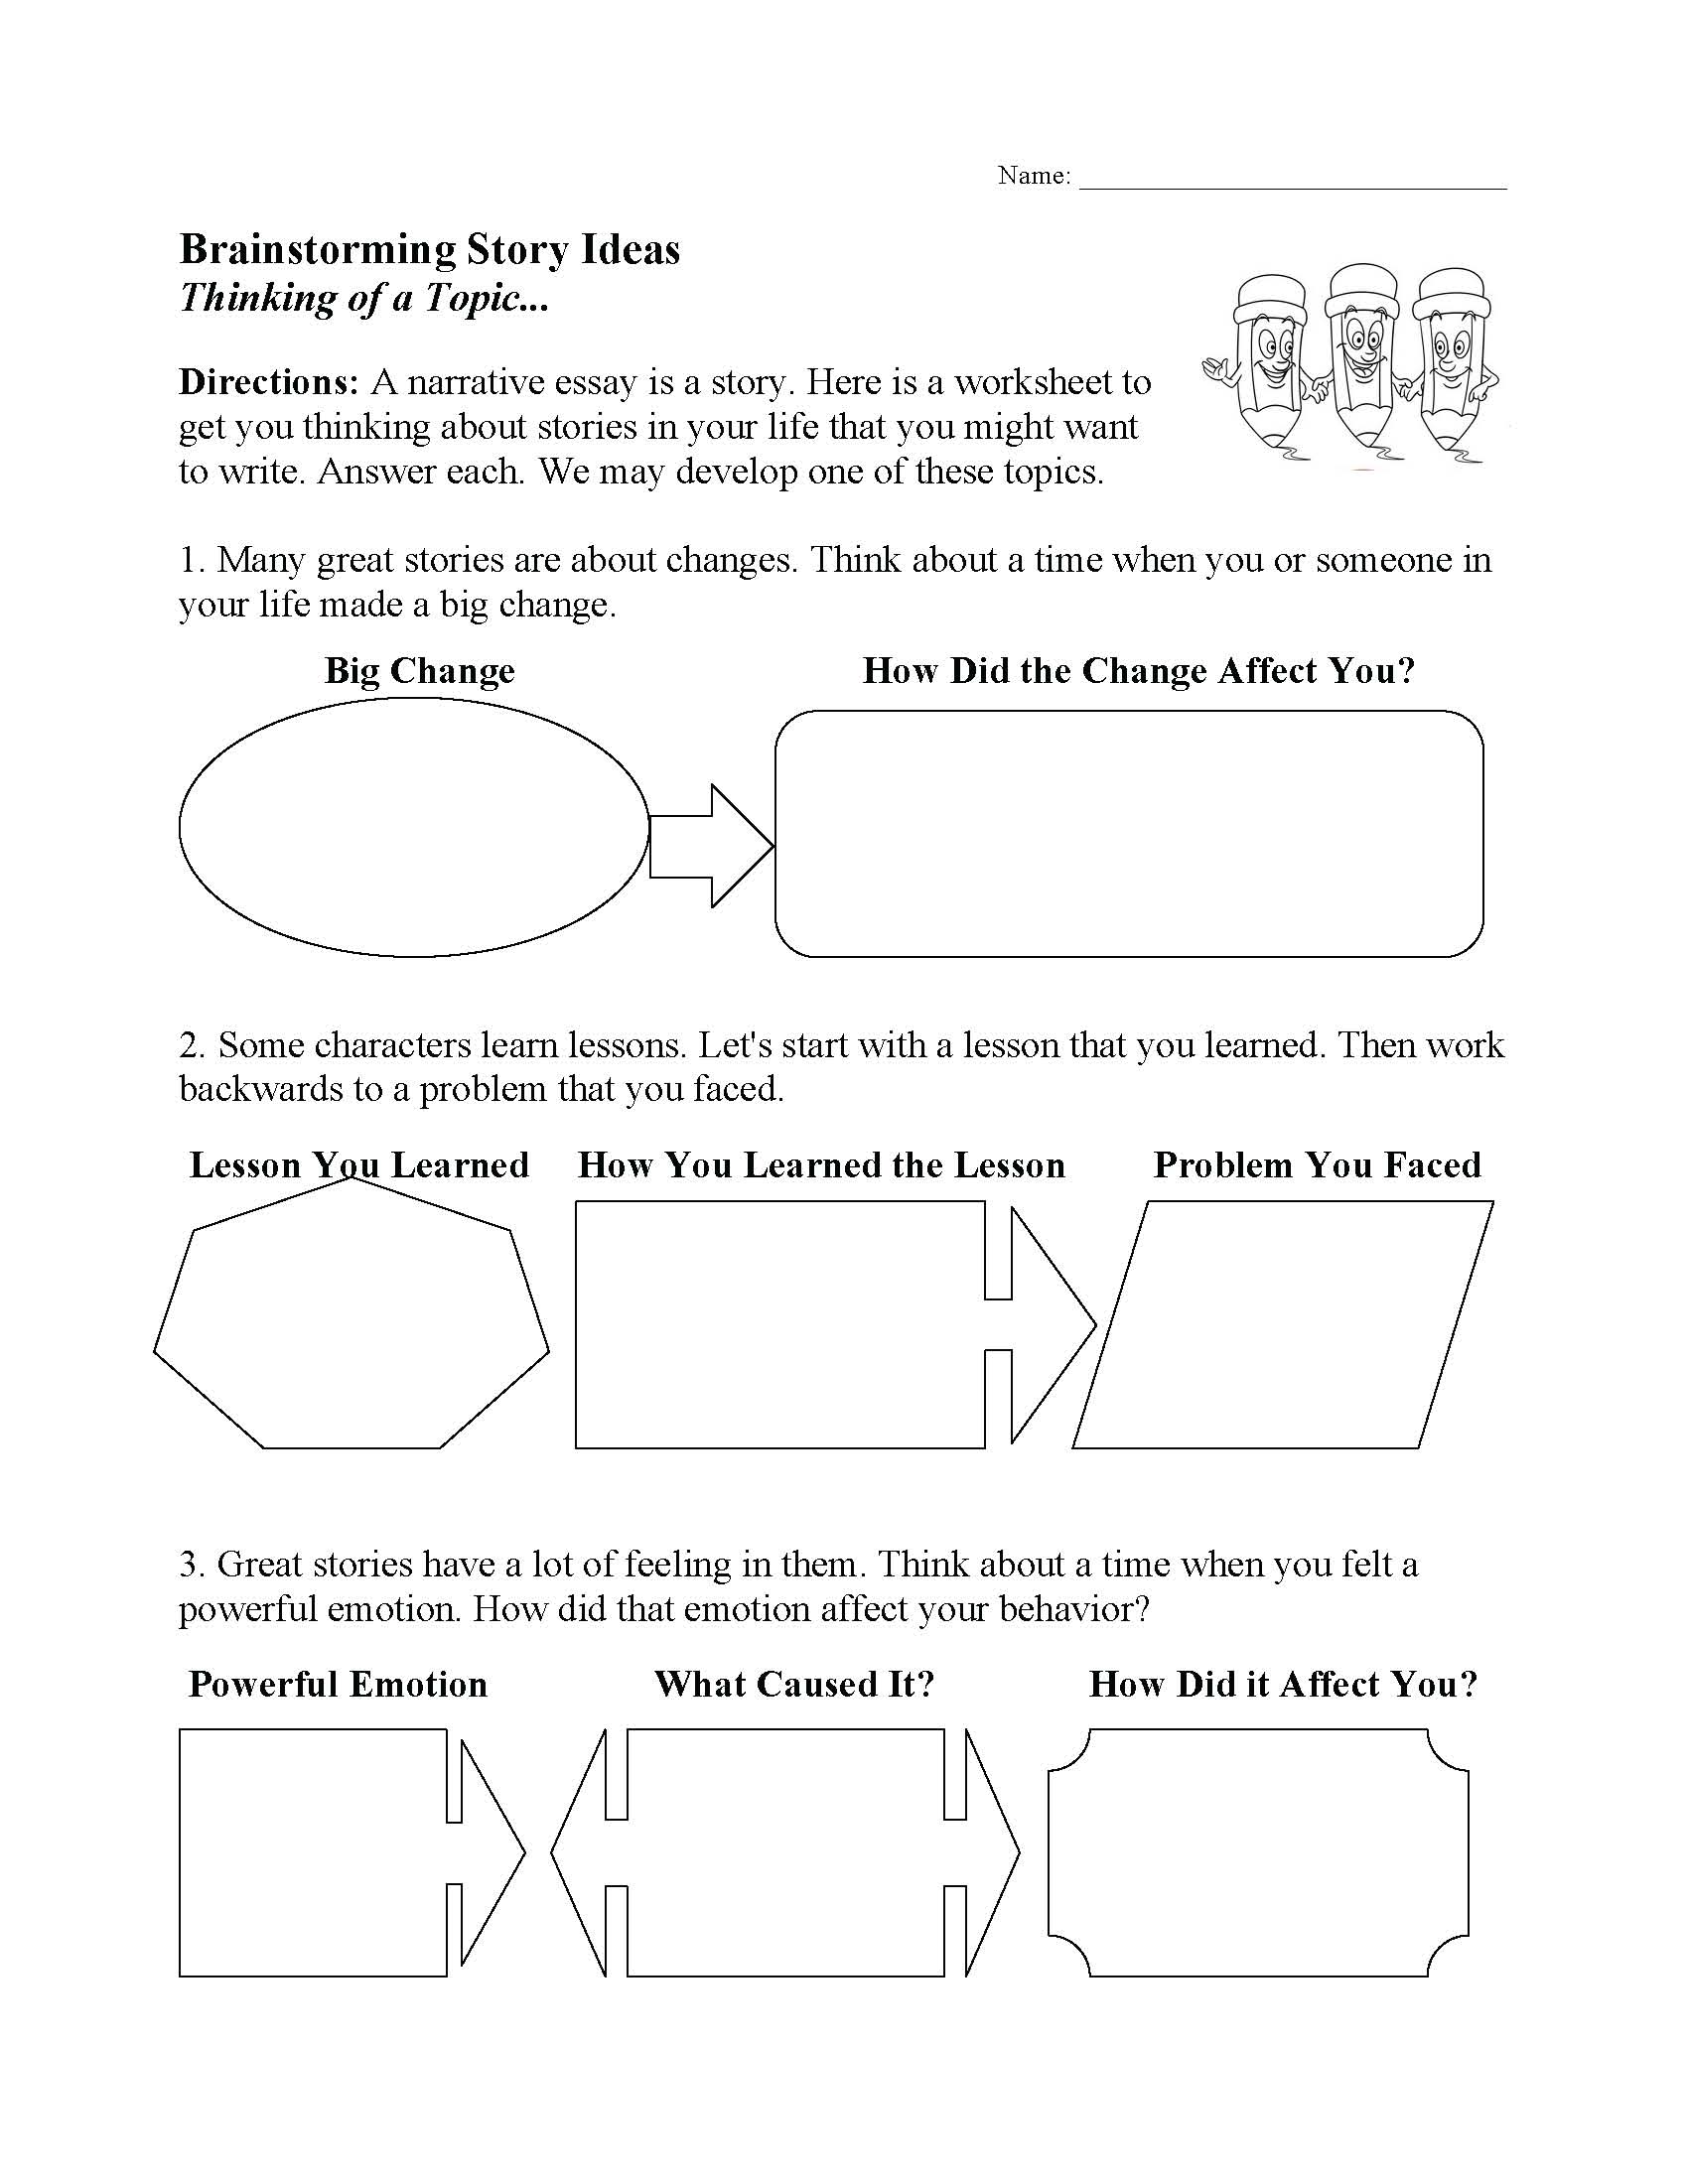 This is a preview image of one of our Writing Worksheets. Click on it to view all of our writing worksheets.